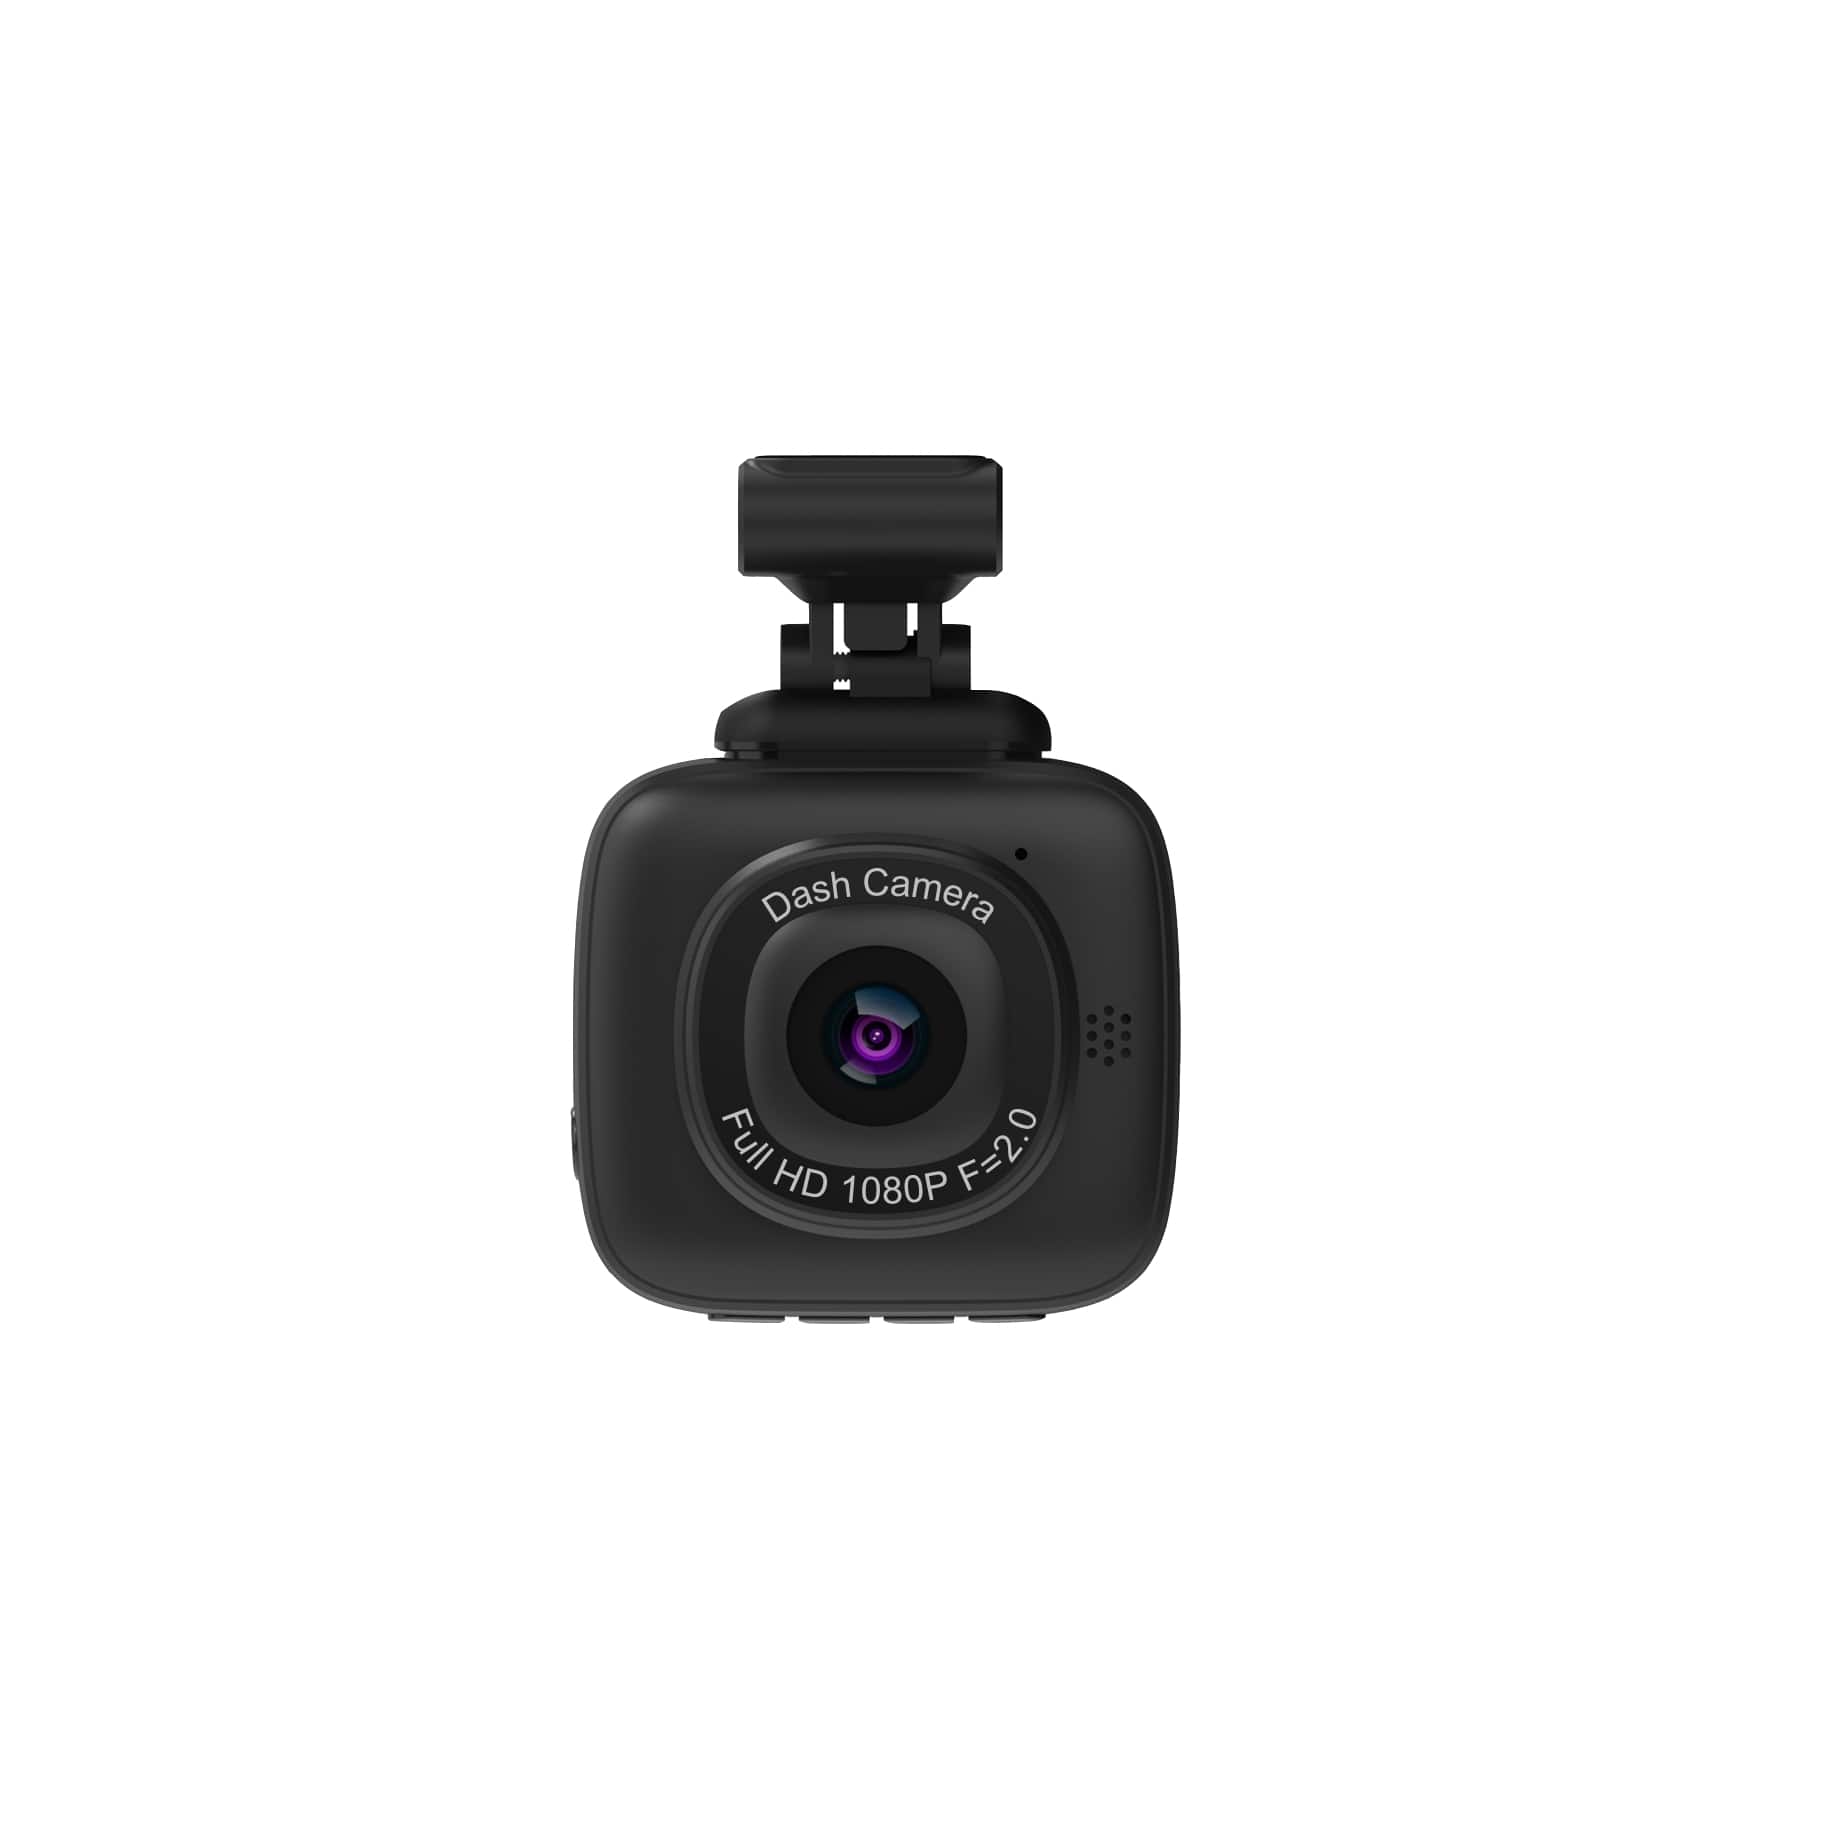 myGEKOgear Orbit 500 Full HD 1080p Wi-Fi Dash Cam with OBD II Cable, 3 Minutes Easy Installation, 24/7 Motion Monitor, 24 HR Too